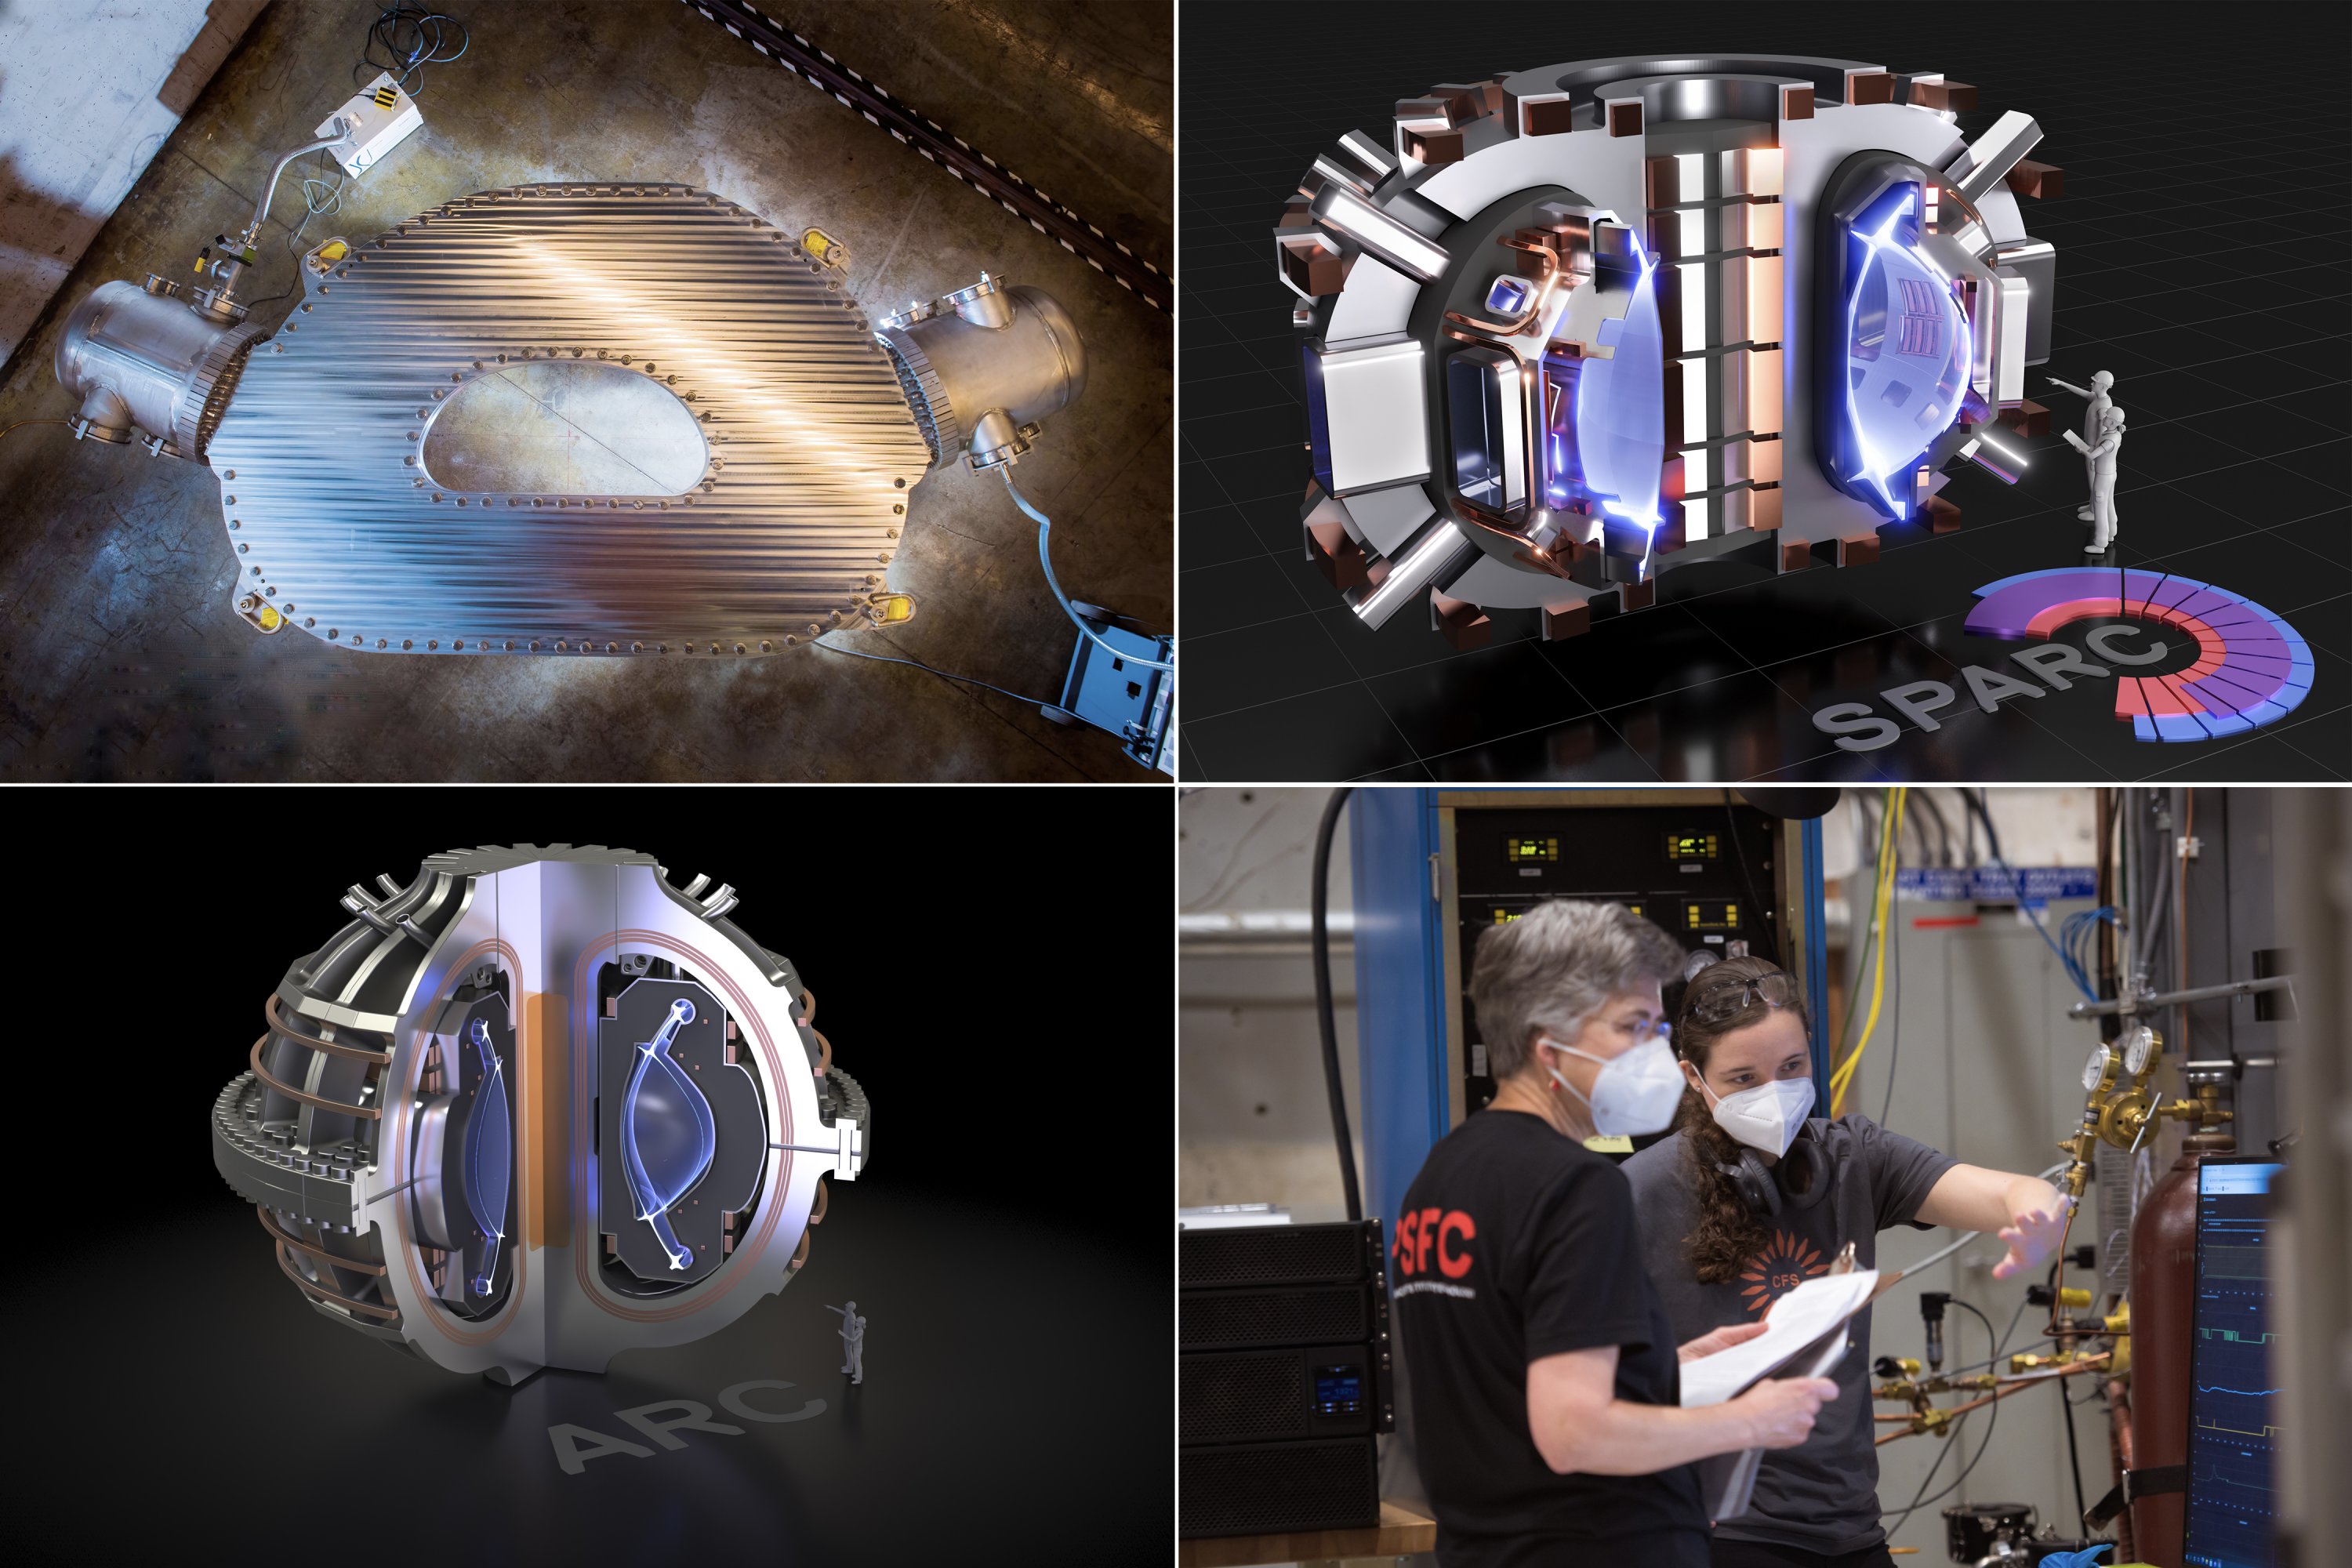 mit-expands-research-collaboration-with-commonwealth-fusion-systems-to